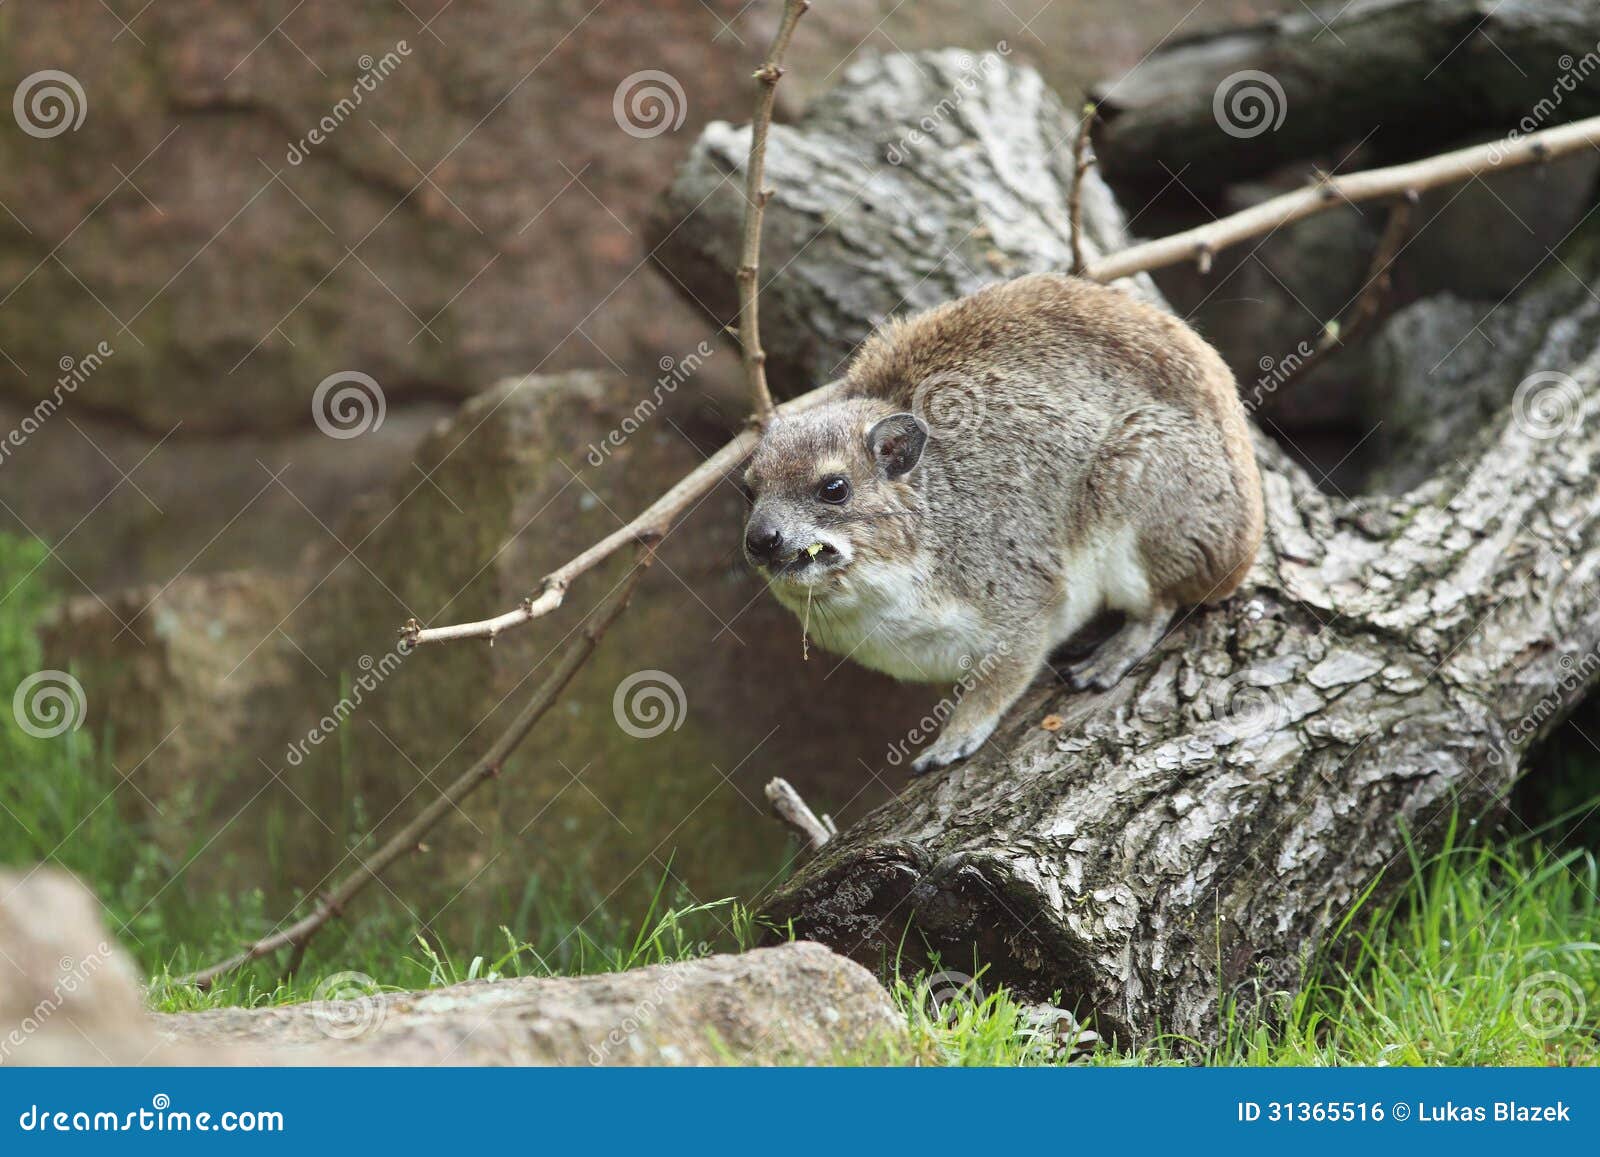 yellow-spotted rock hyrax